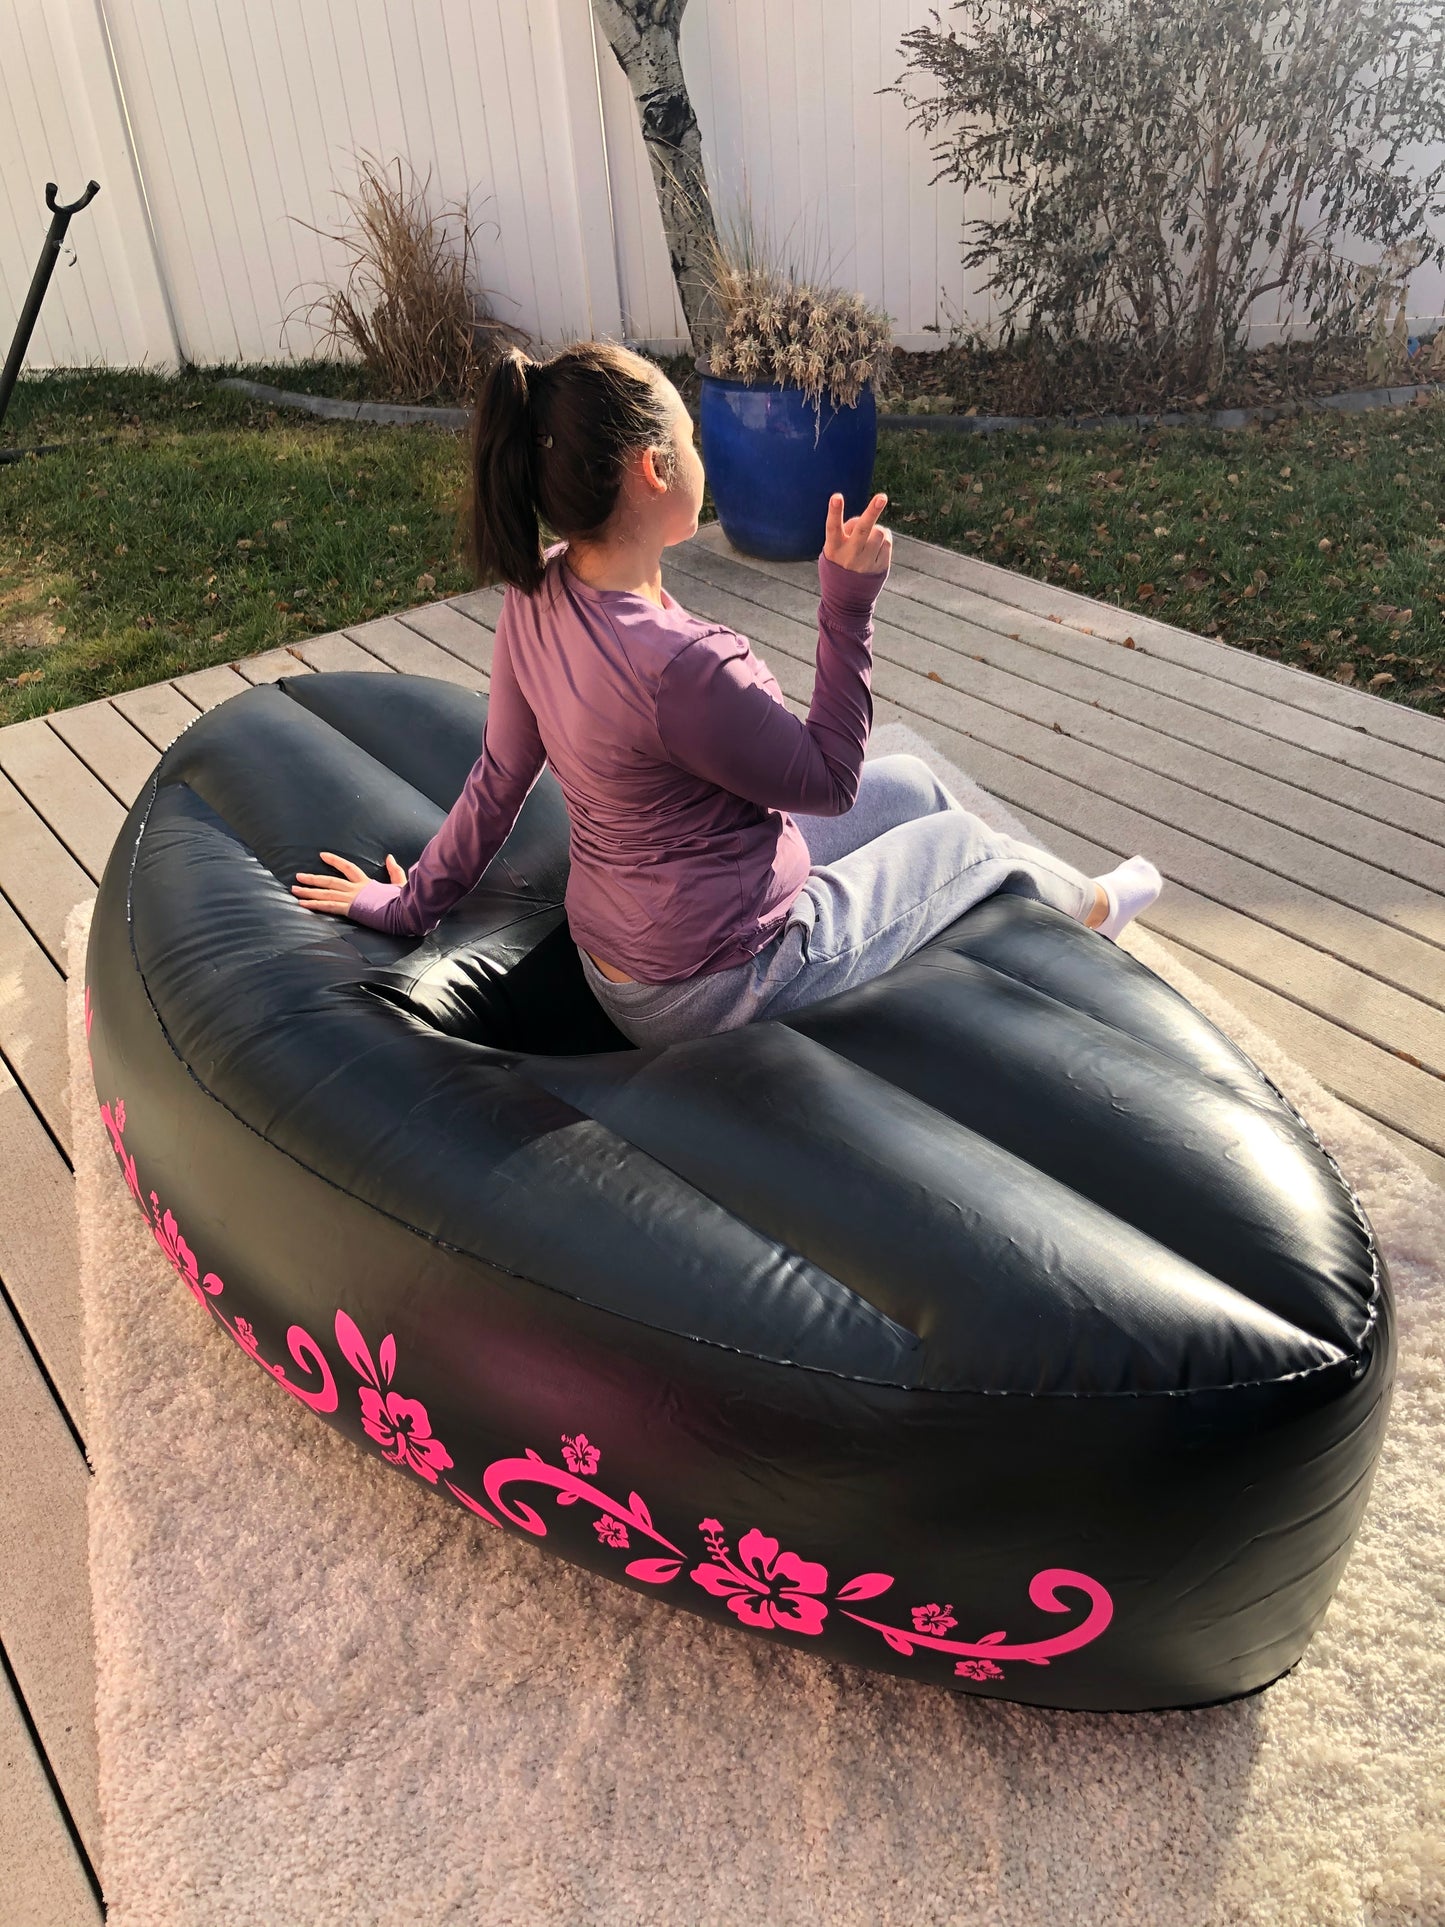 Inflatable Bbl mattress (oval) with more support